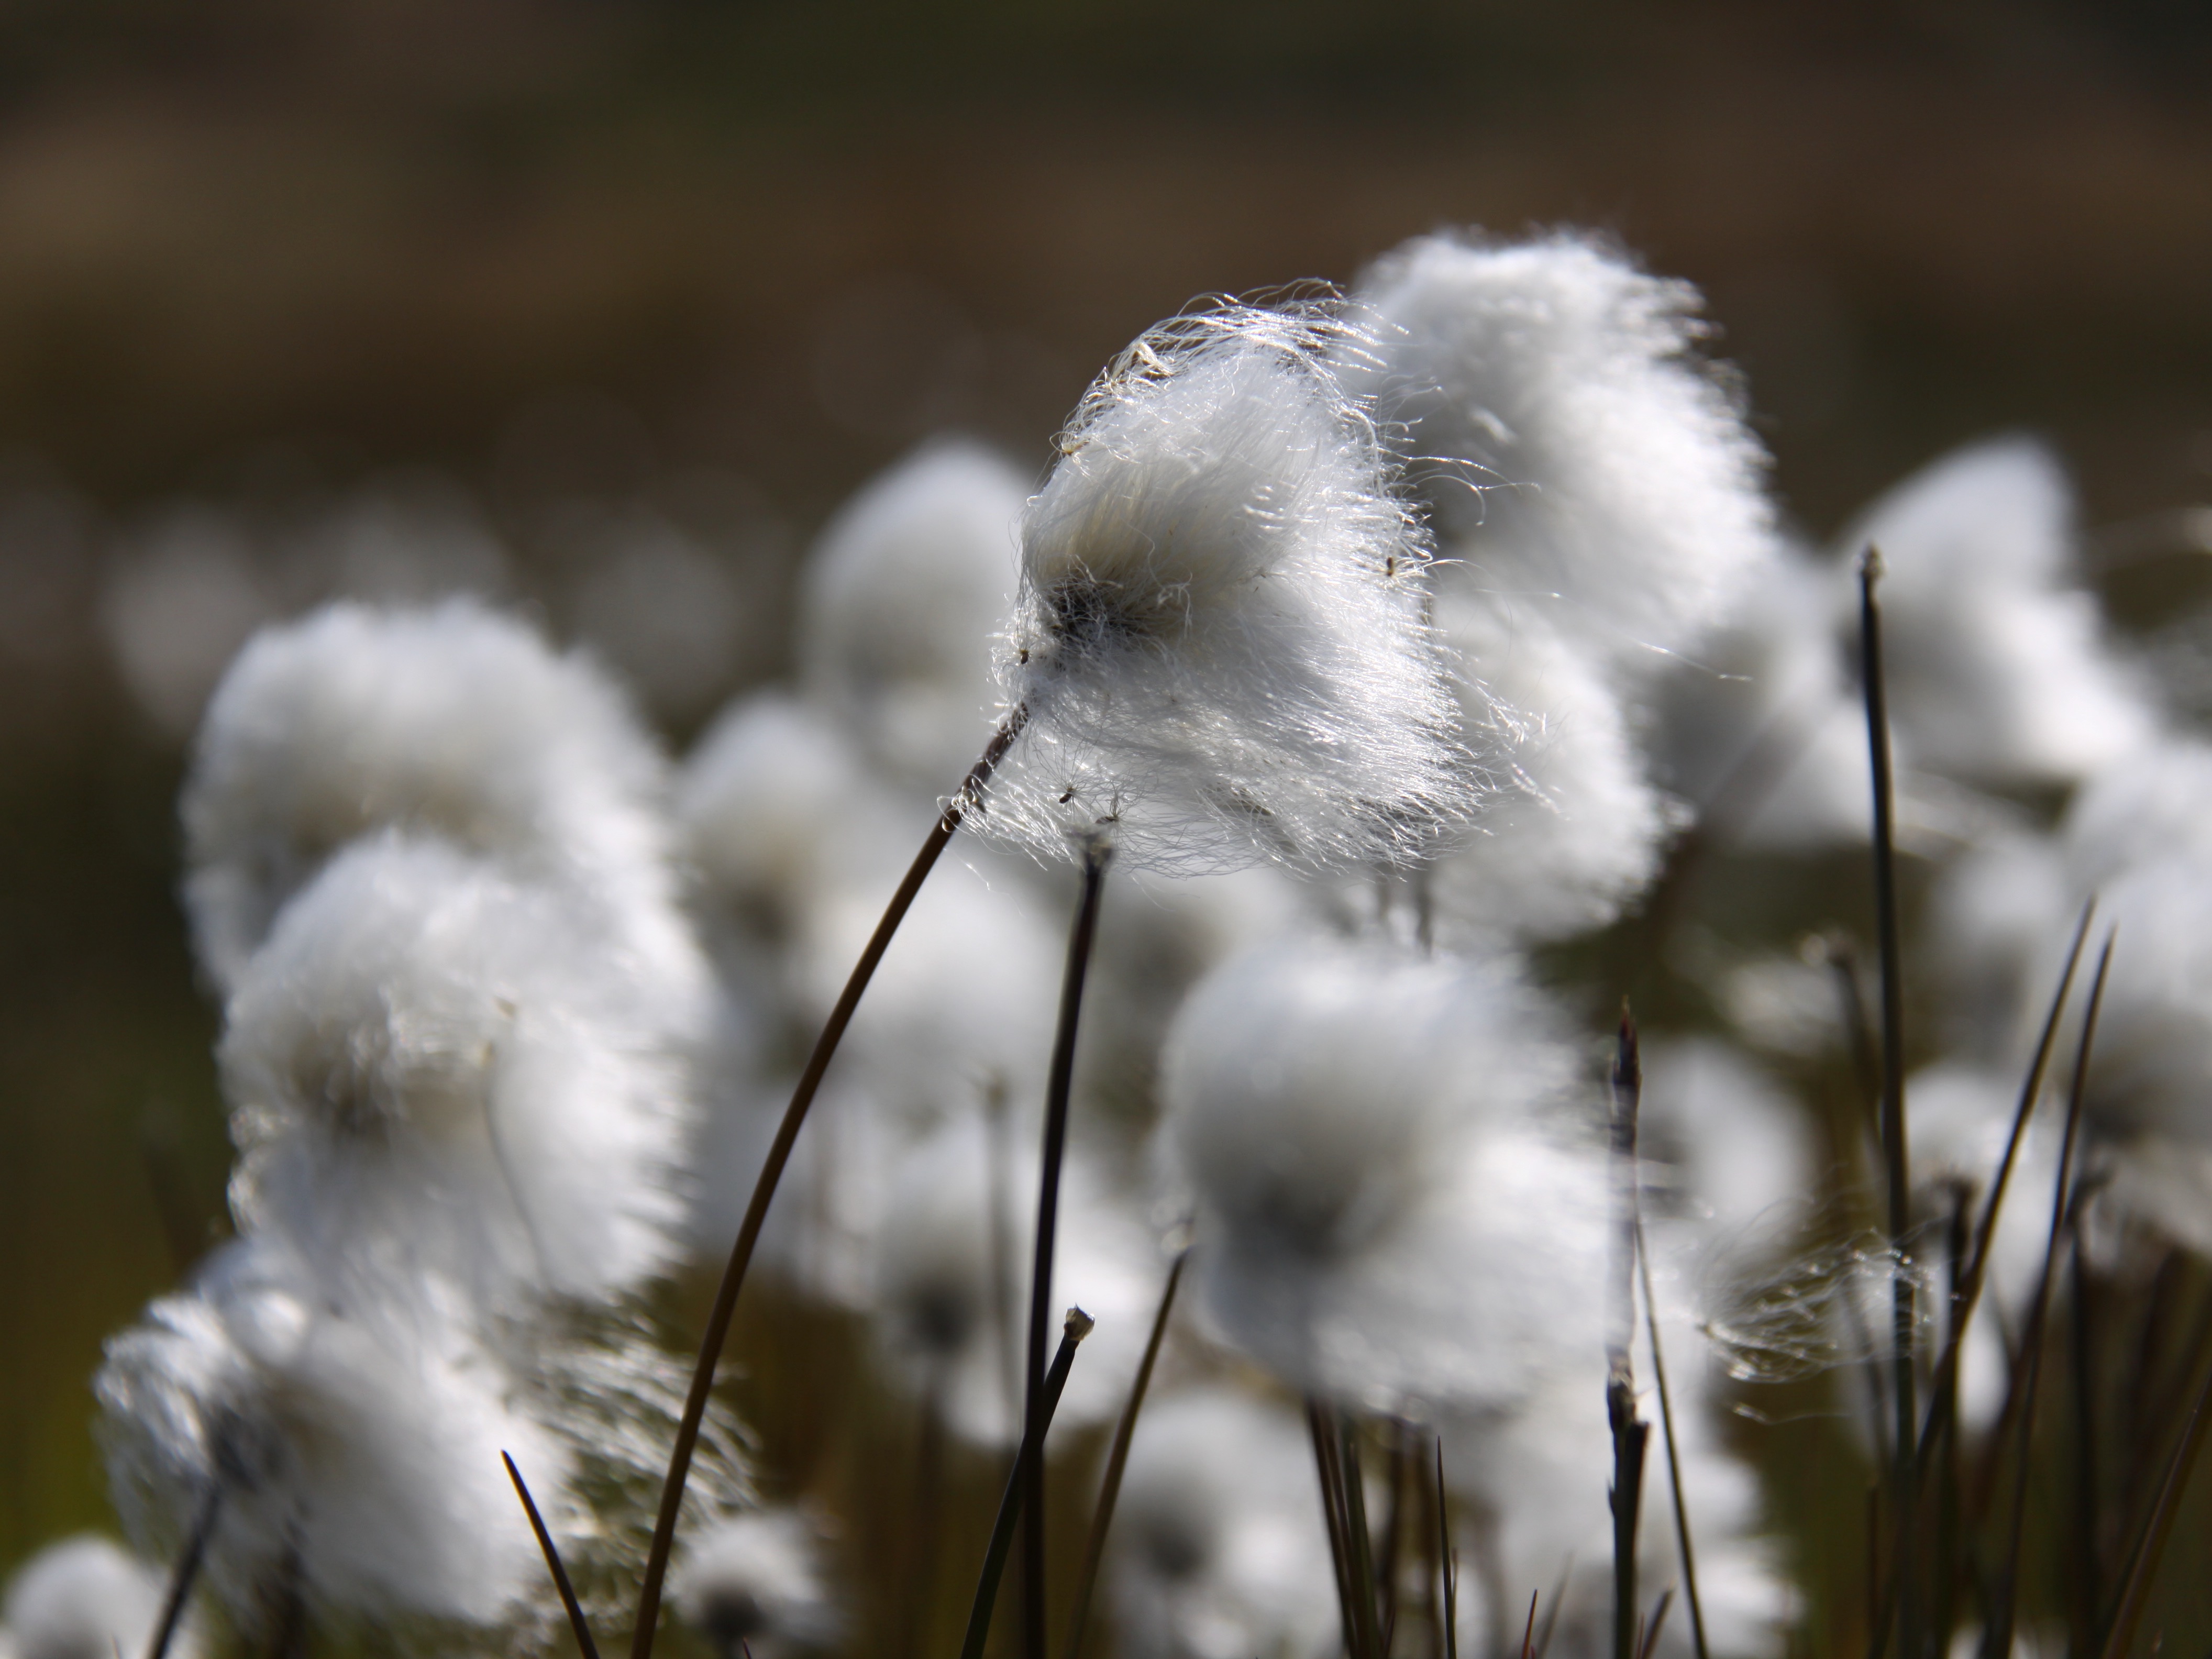 Cottongrass blows in the Greenland wind. (Eric Post/UC Davis)